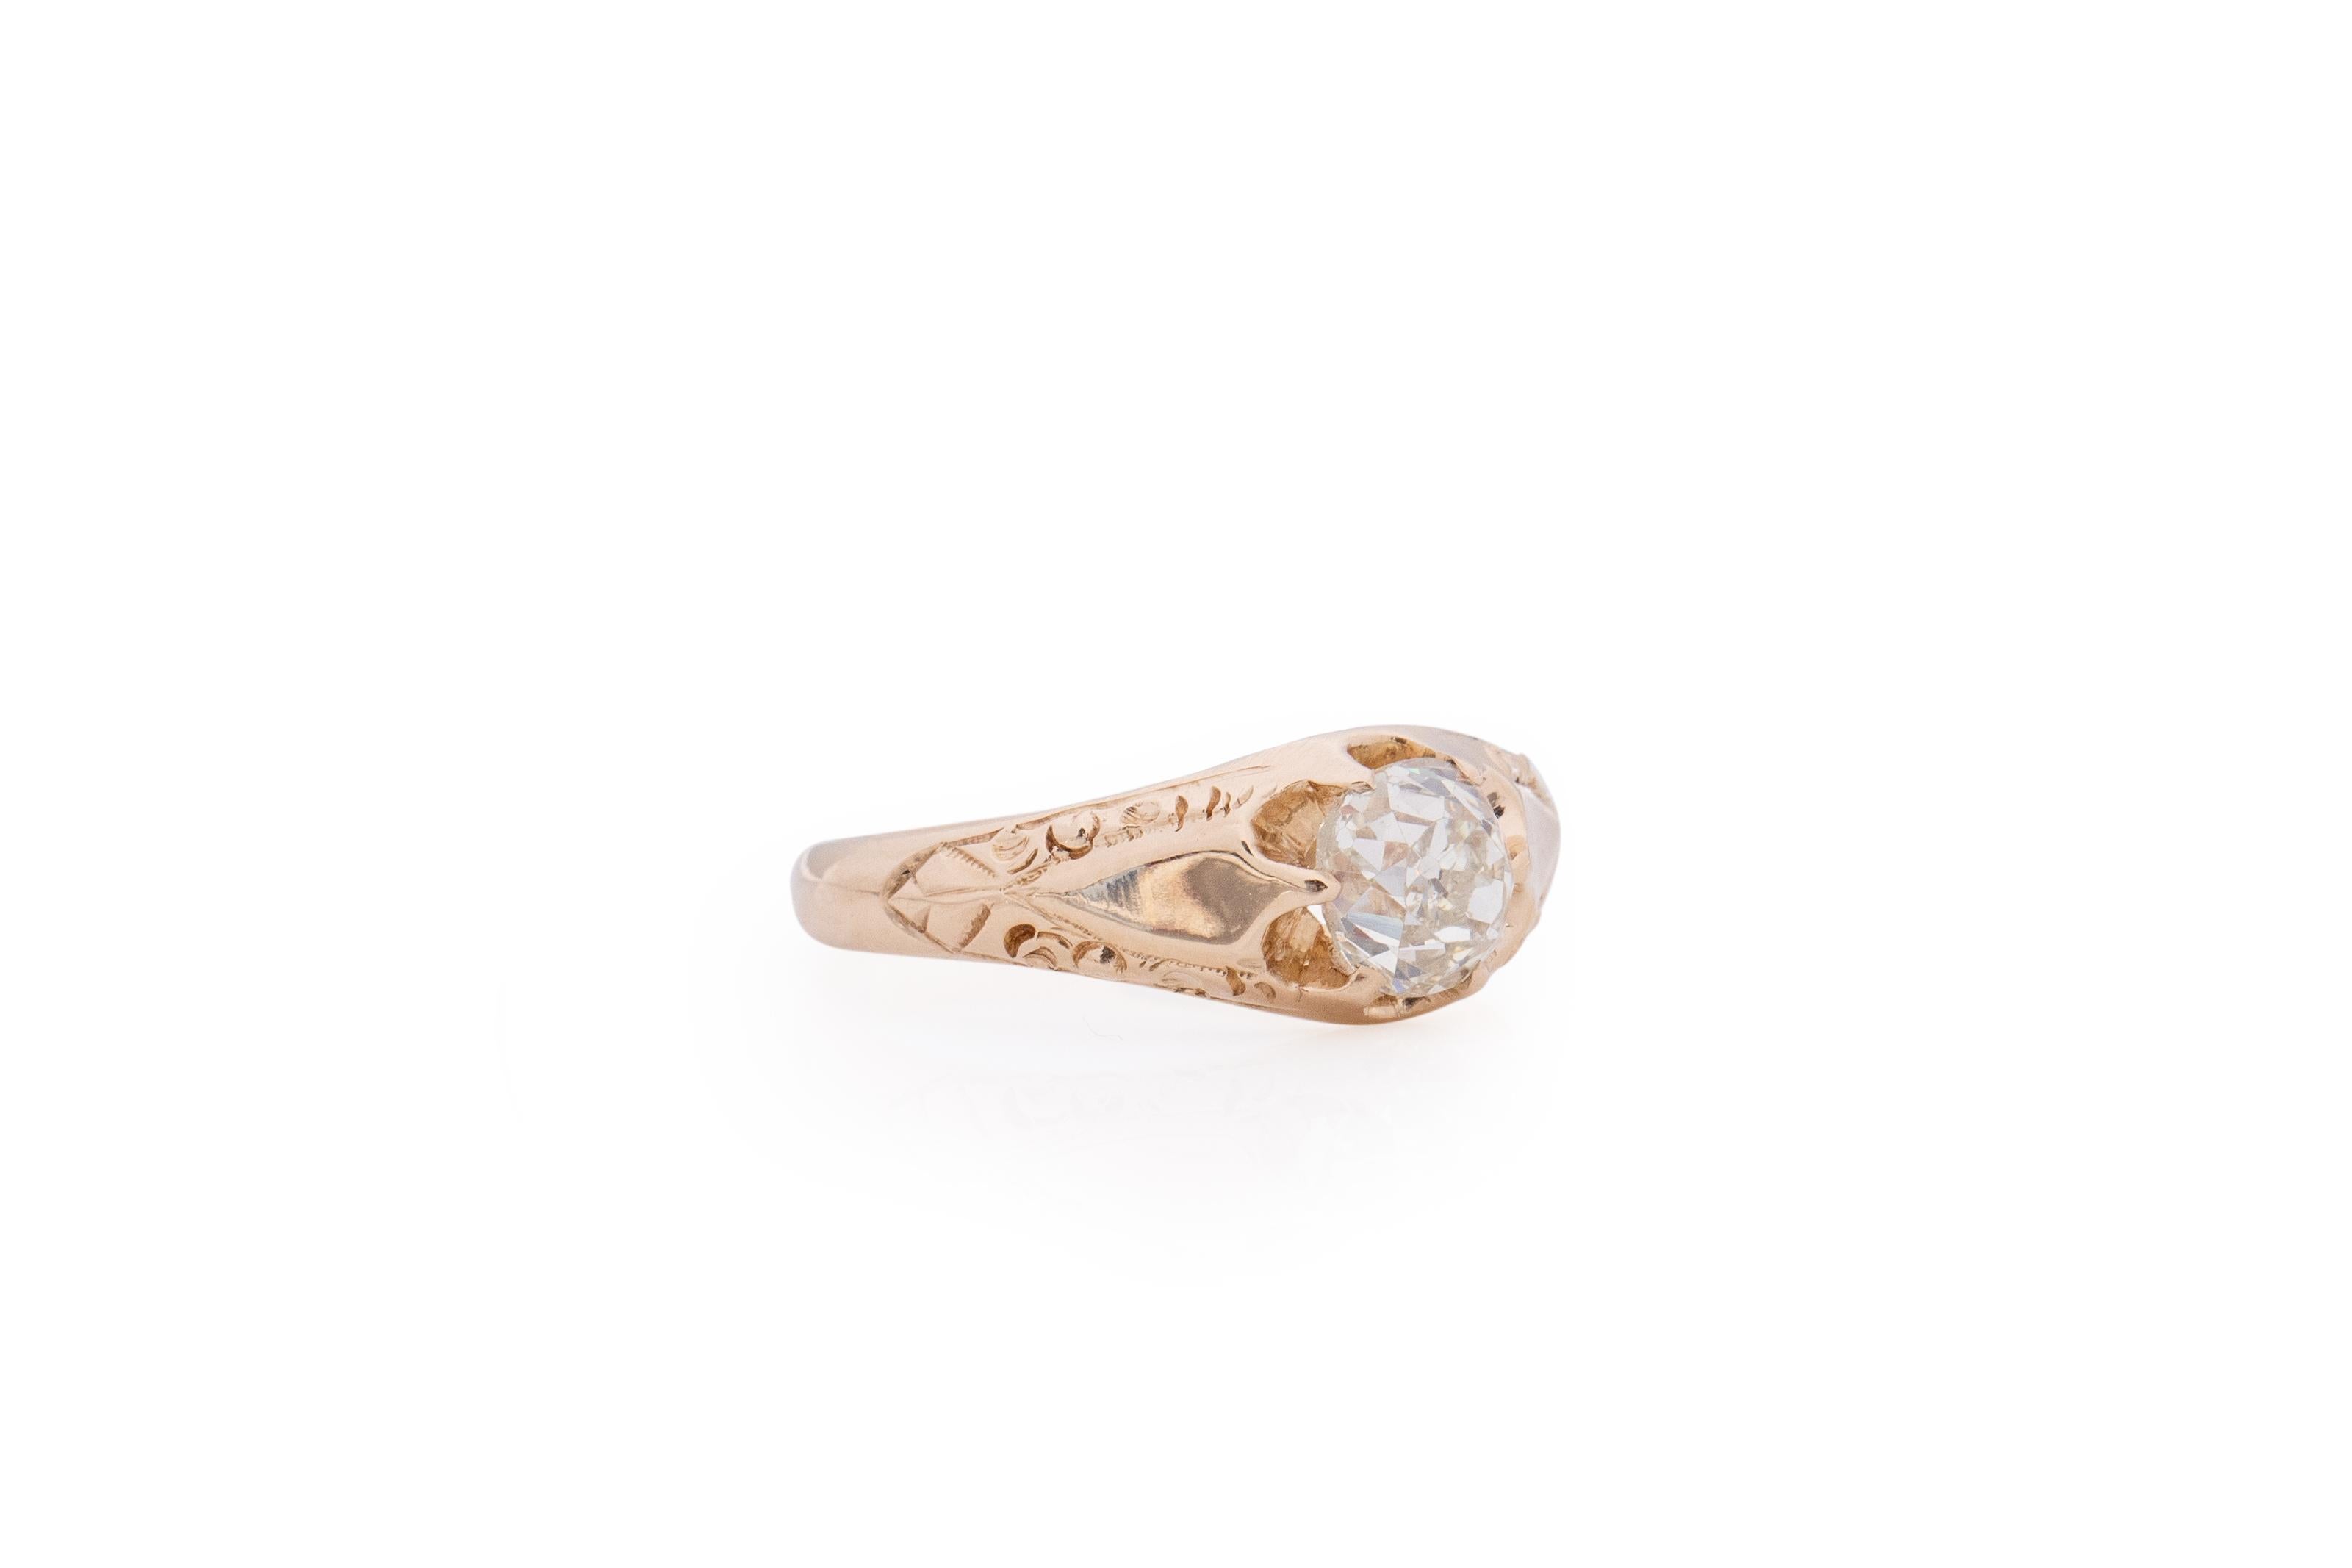 Item Details: 
Ring Size: 6.75
Metal Type: 14 Karat Yellow Gold [Hallmarked, and Tested]
Weight: 2.1 grams

Center Diamond Details:
GIA REPORT #: 5212441231
Weight: 1.10
Cut: Old European brilliant
Color: N (Light Yellow)
Clarity: SI1
Measurements: